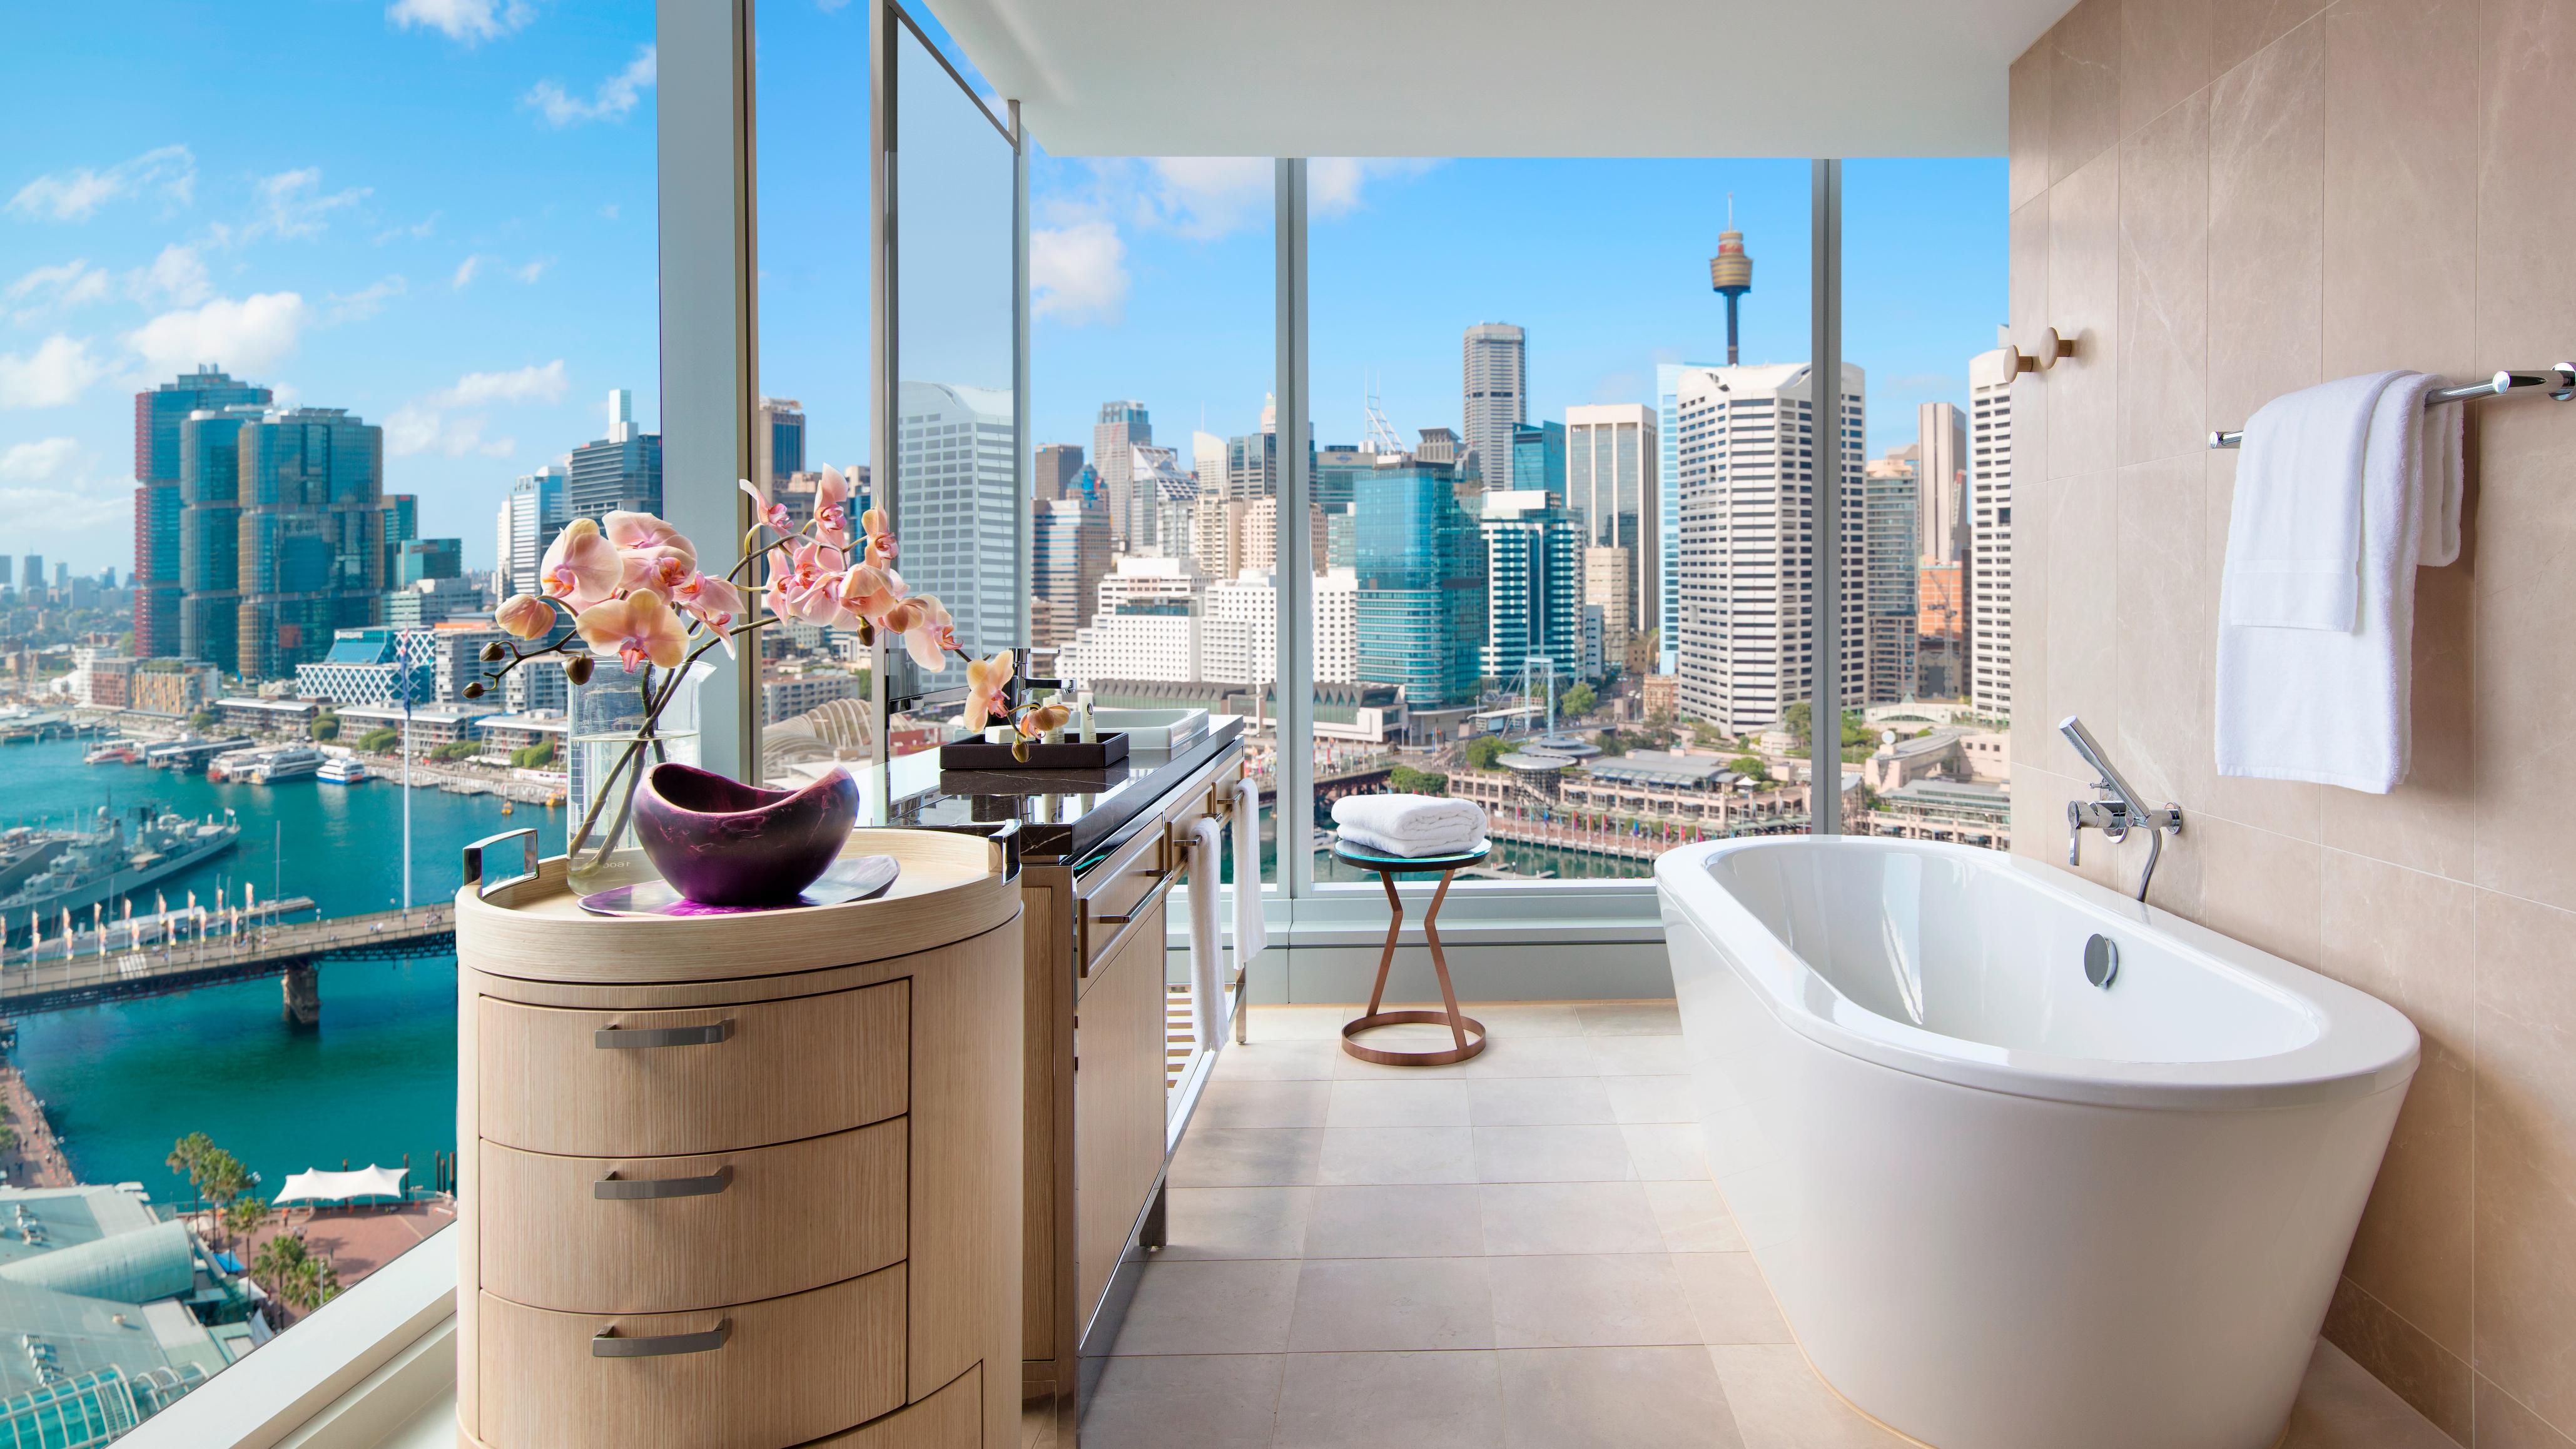 Hotel Bathtubs With Jaw Dropping Views, What Company Makes The Best Bathtubs